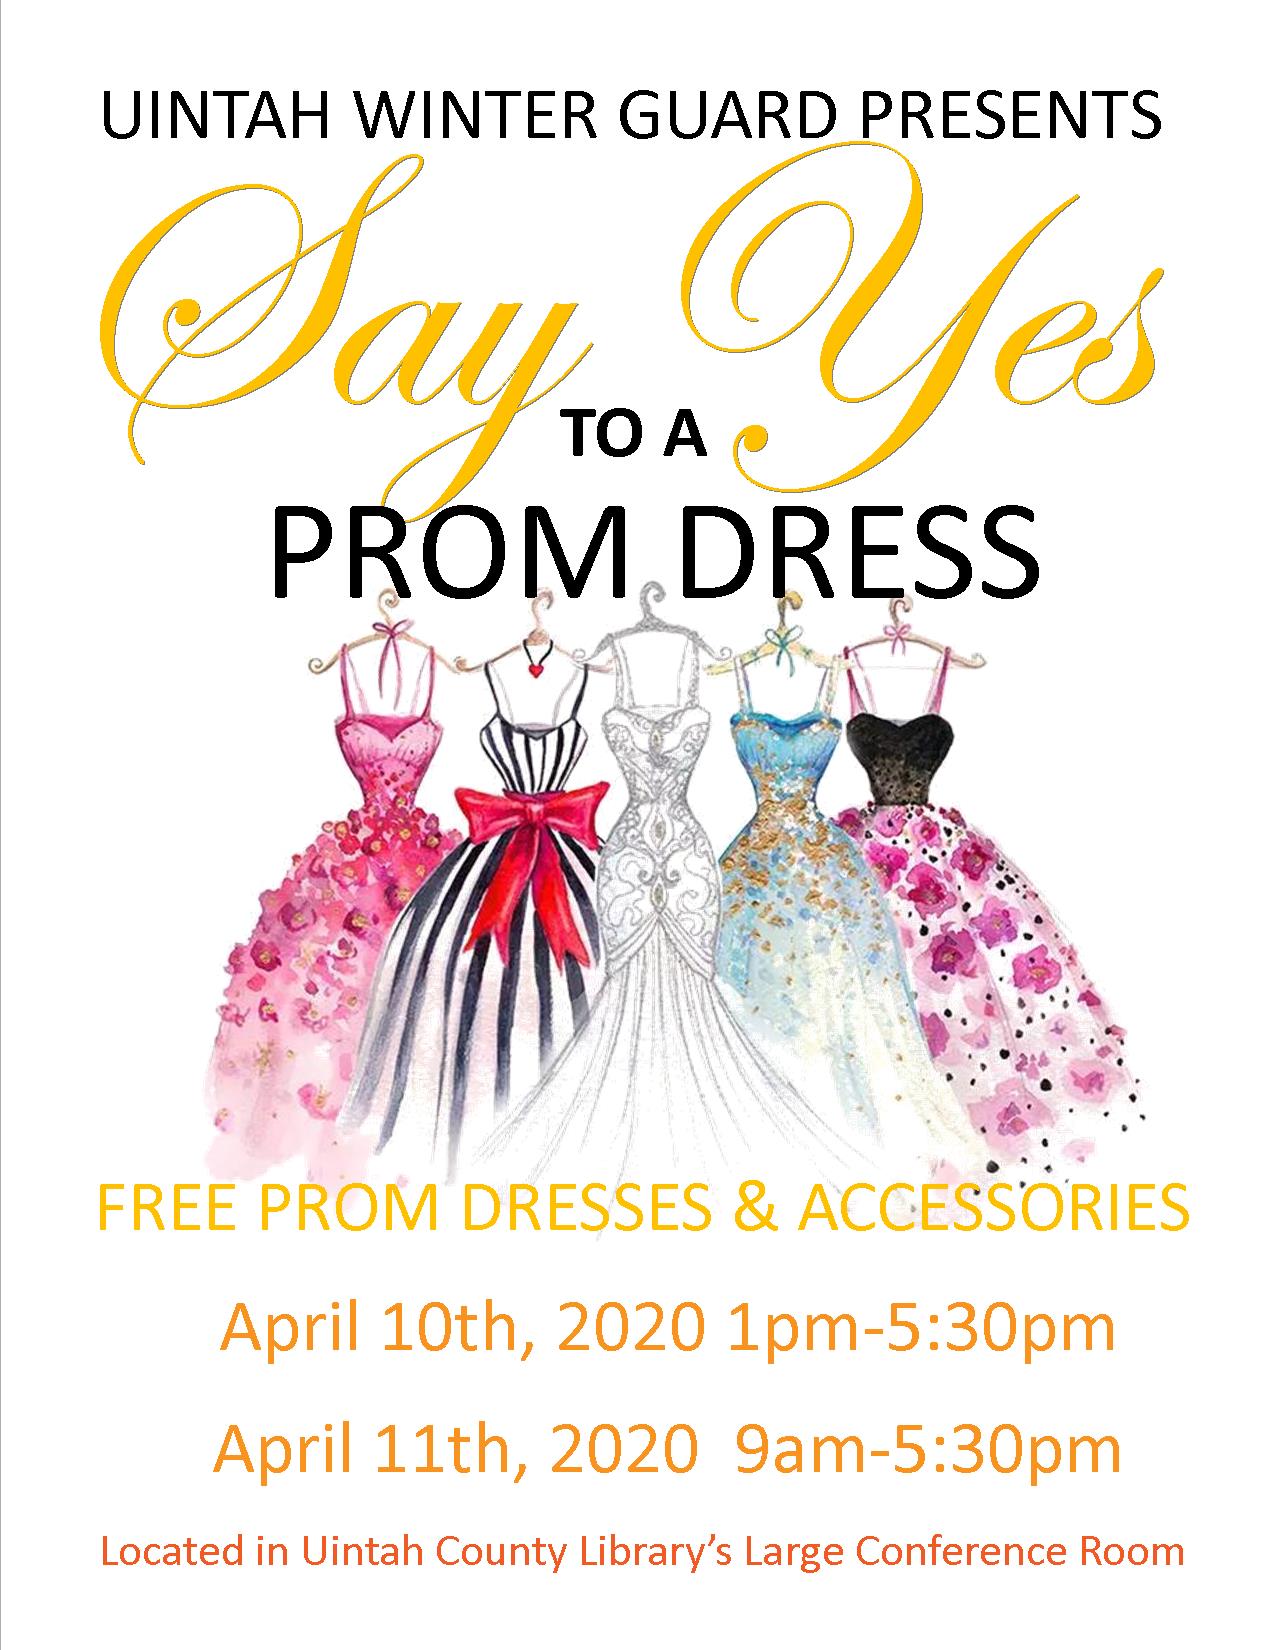 Uintah Winter Guard Presents: Say Yes to a Prom Dress   Free prom dresses and accessories   April 10th, 2020 from 1pm to 5:30 pm  April 11th, 2020 from 9am to 5:30pm   Located in the Uintah County Library's Large Conference Room